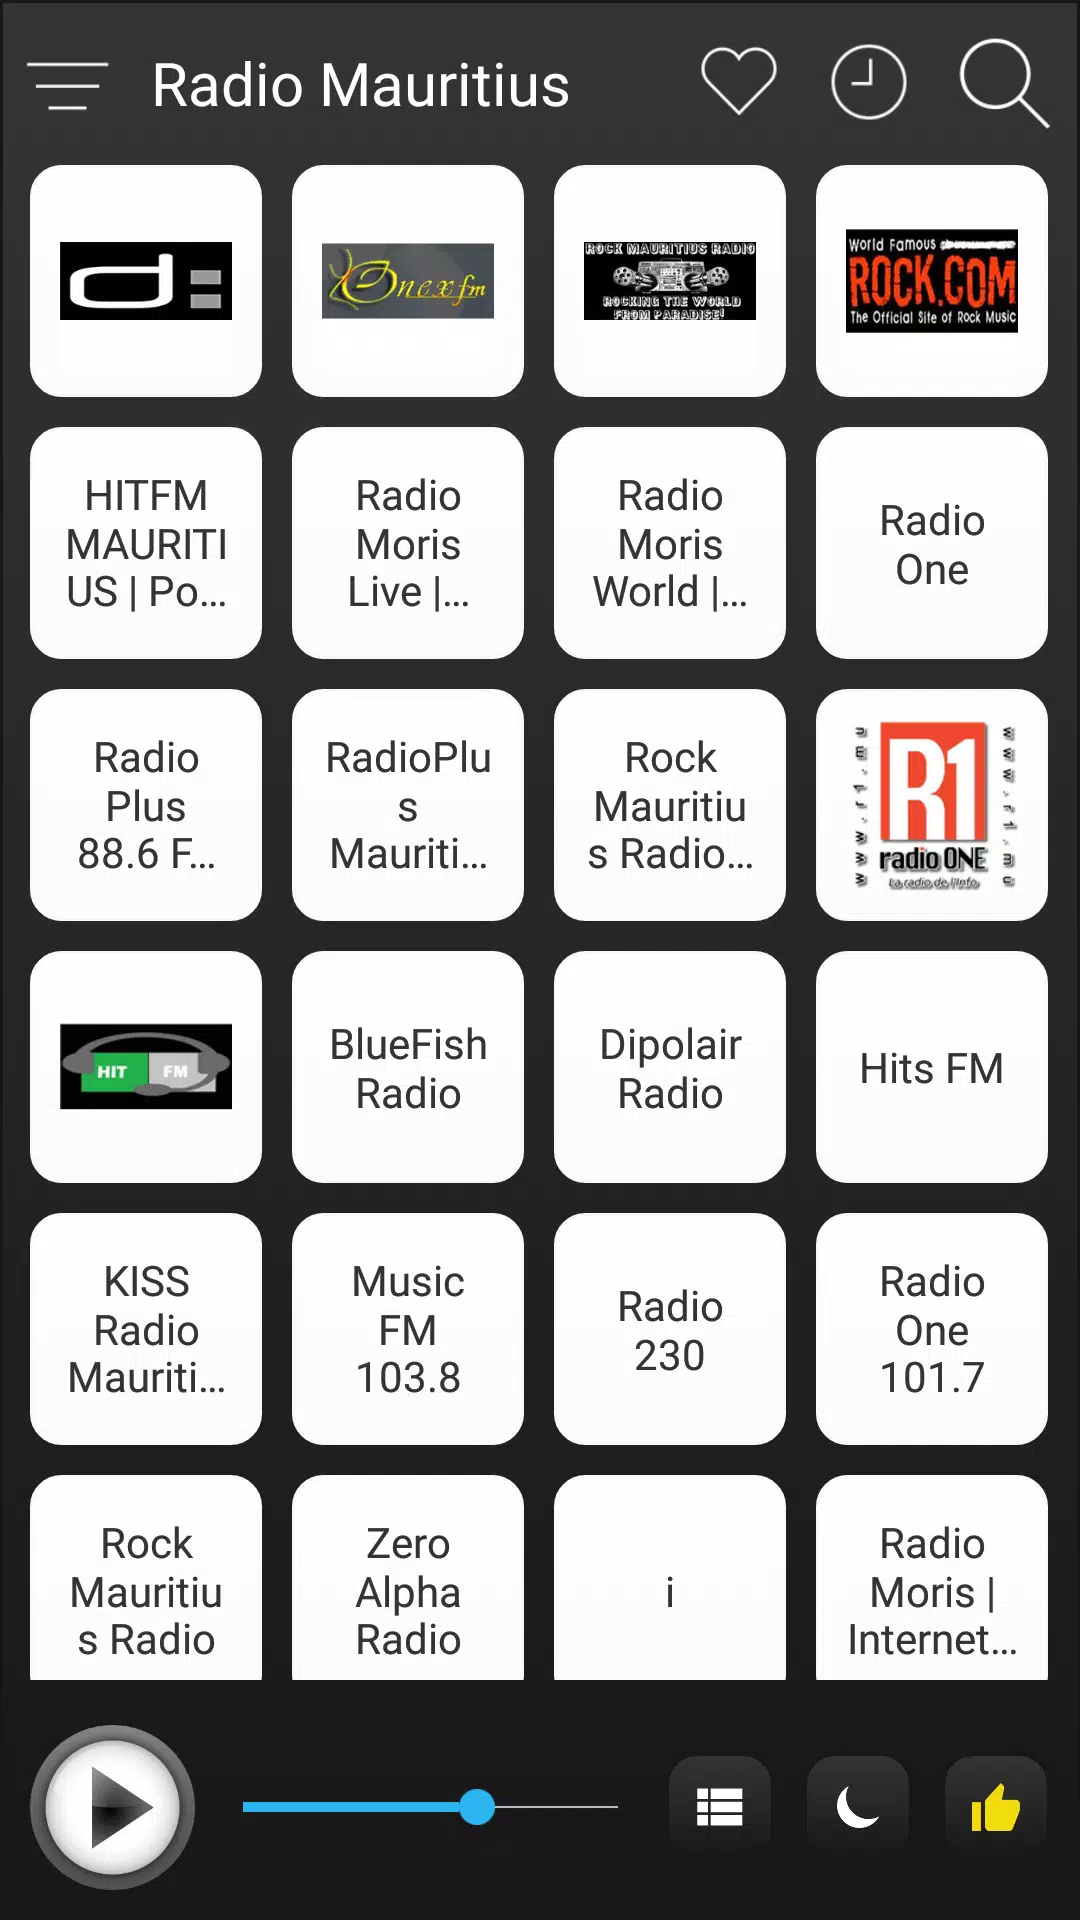 Mauritius Radio Stations Online - Mauritius FM AM for Android - APK Download